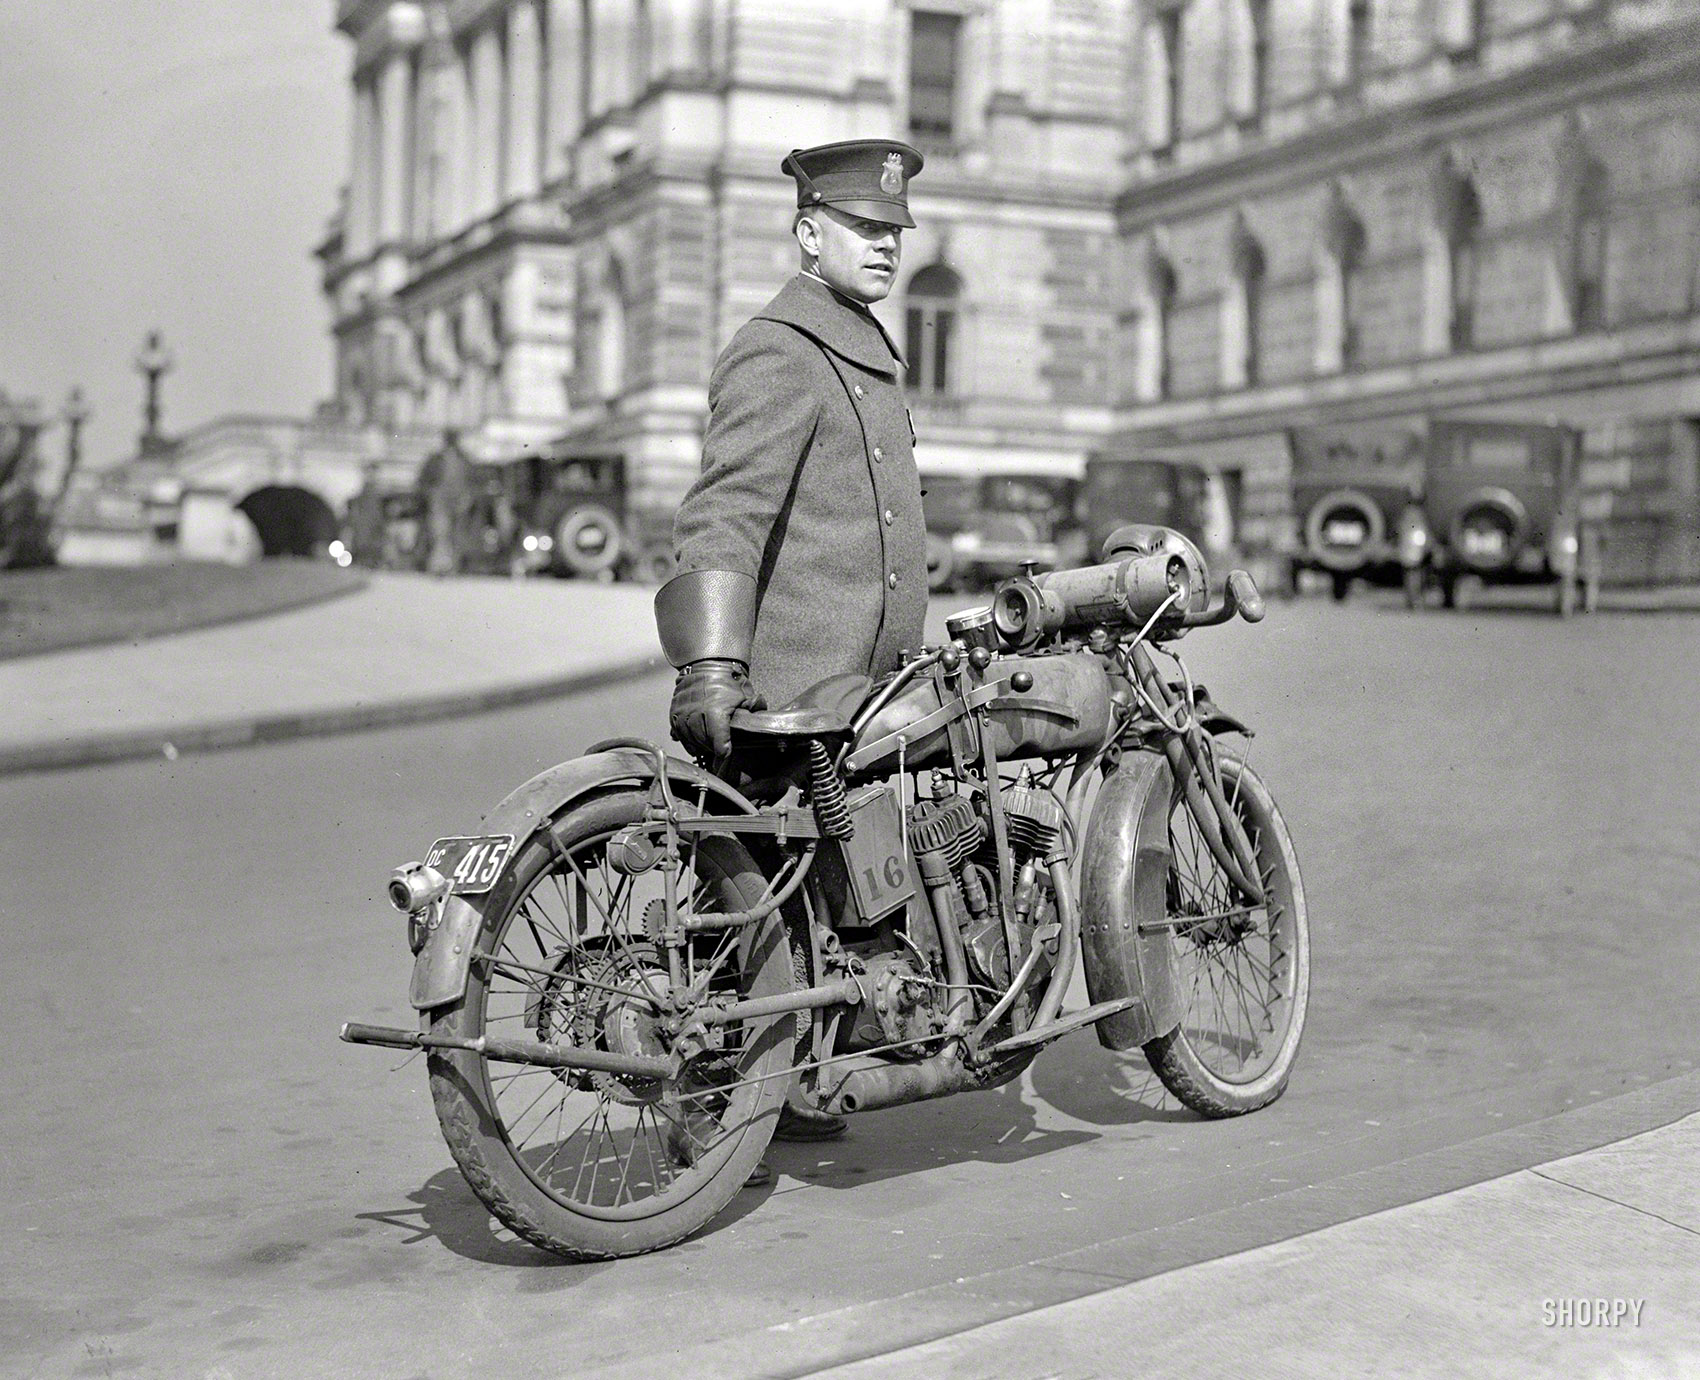 Washington, D.C., 1924. "Roache #5." At the Library of Congress. National Photo Company Collection glass negative. View full size.